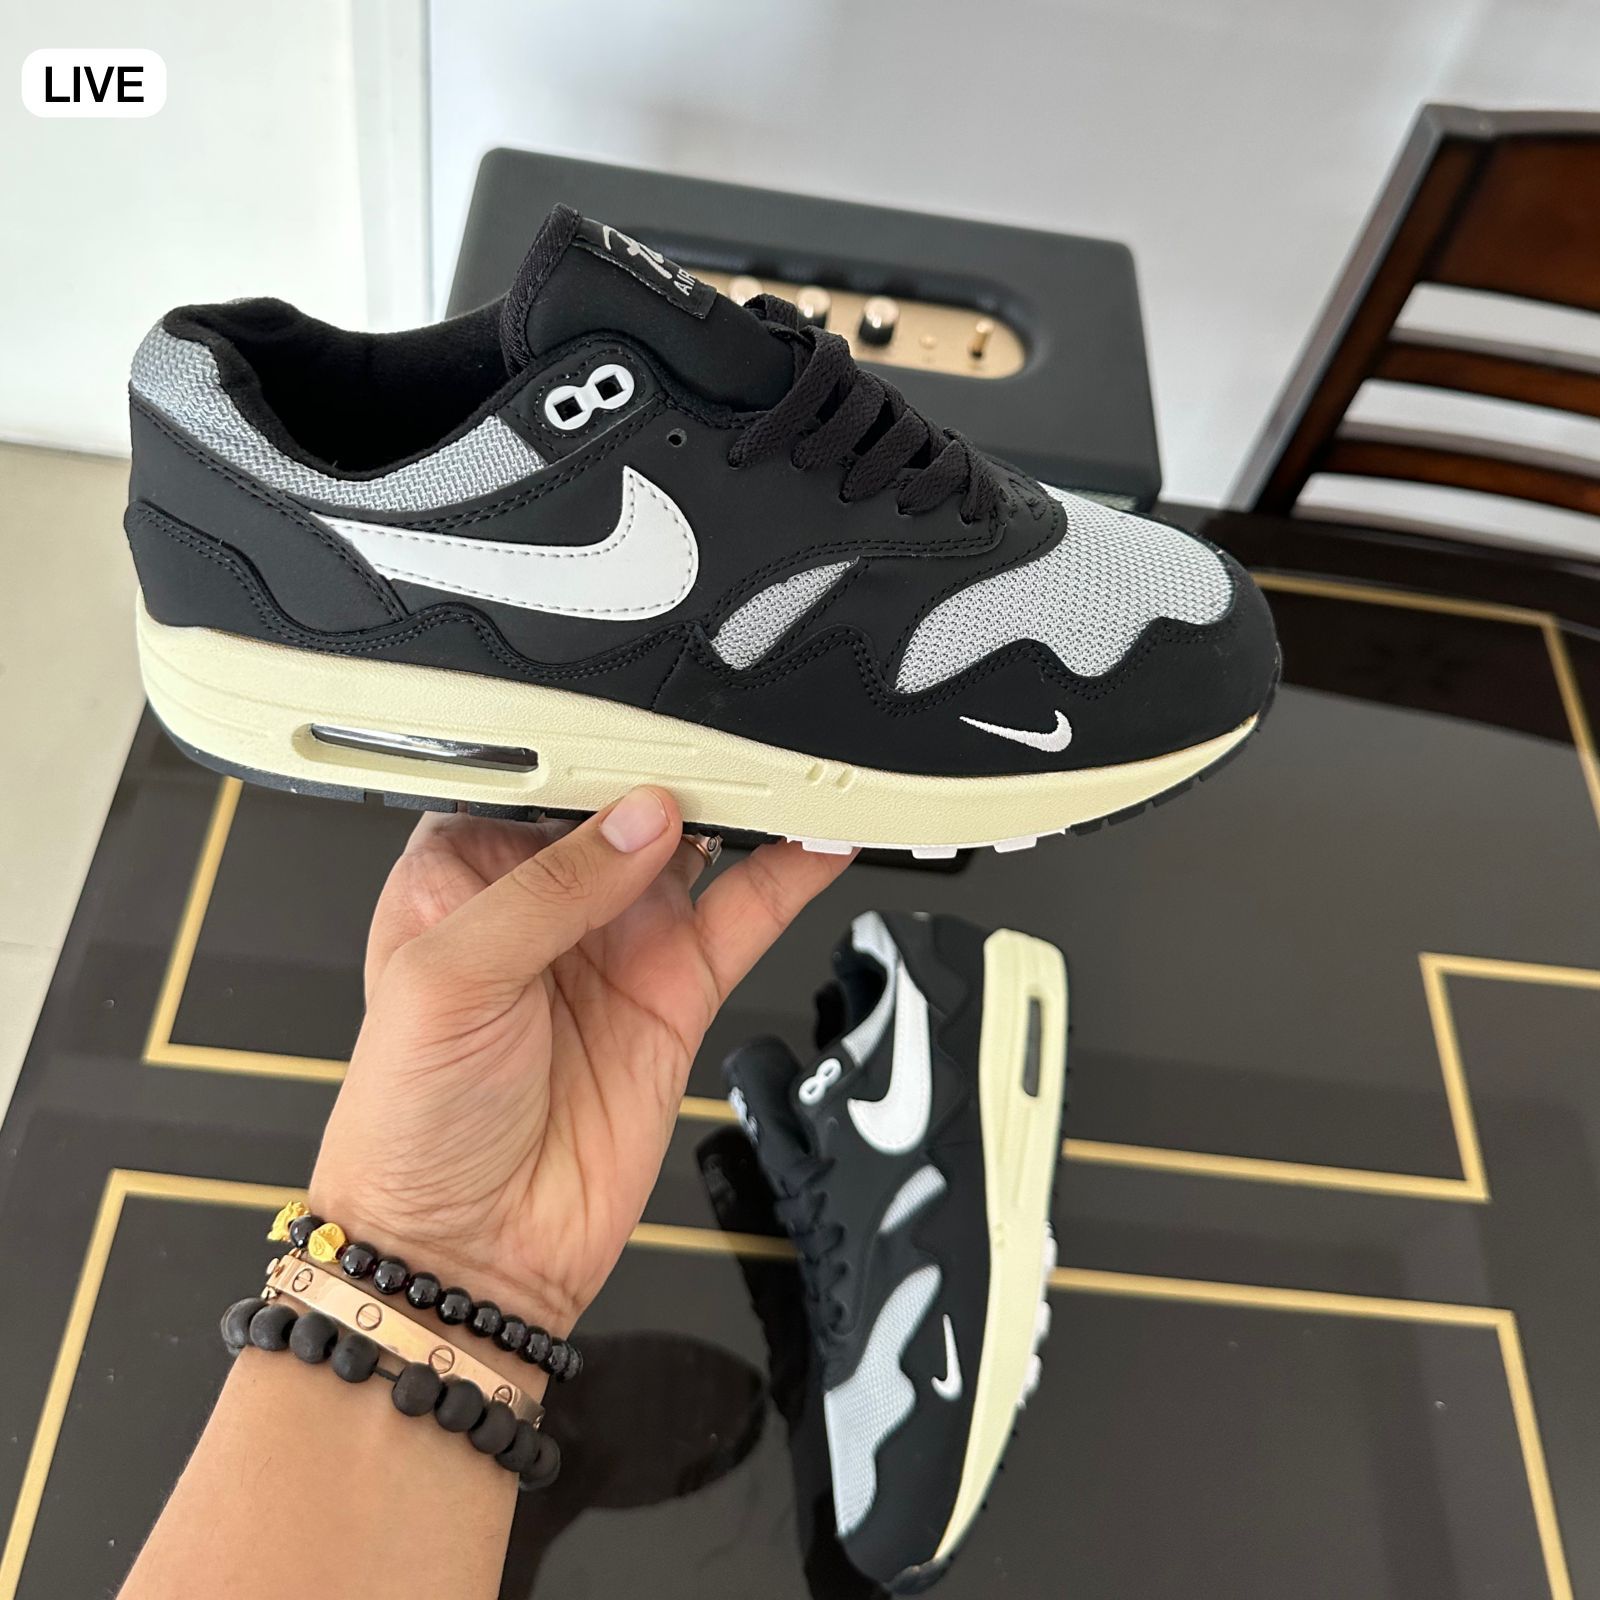 Airmax 1 Patta Imported Sneakers Black